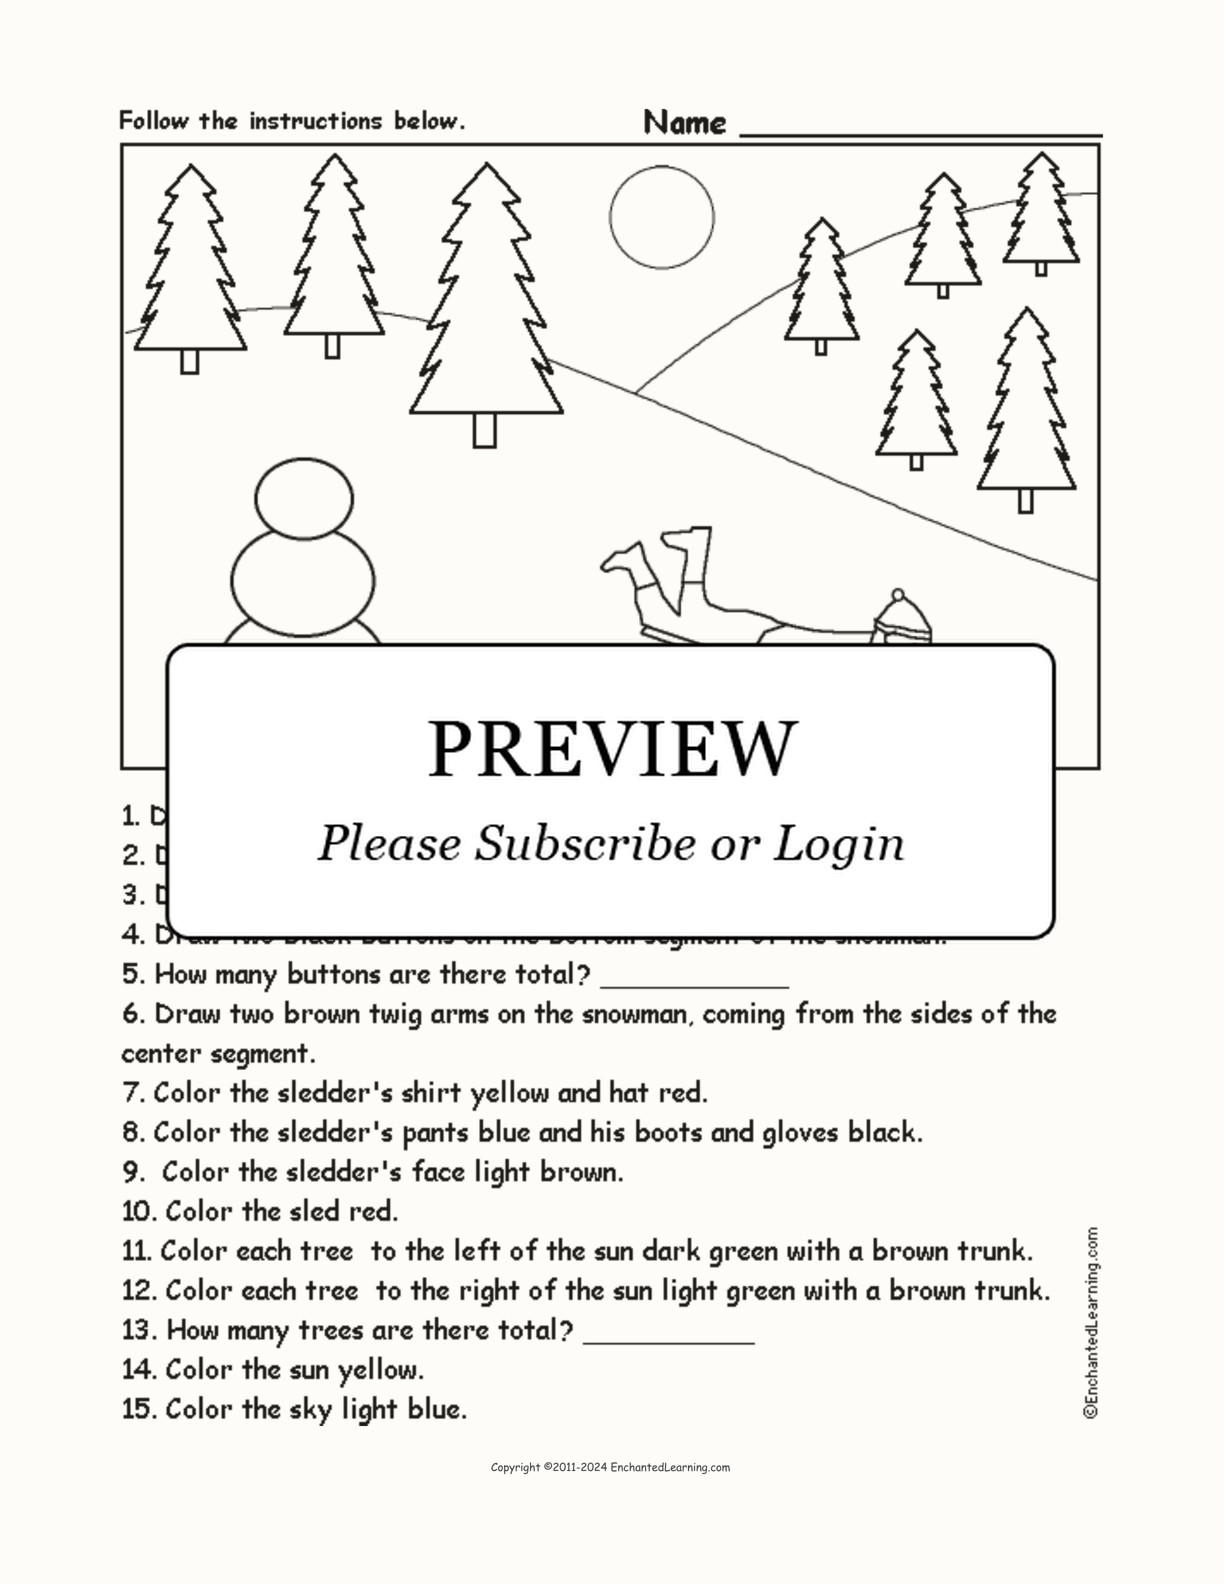 Winter Scene - Follow the Instructions interactive worksheet page 1